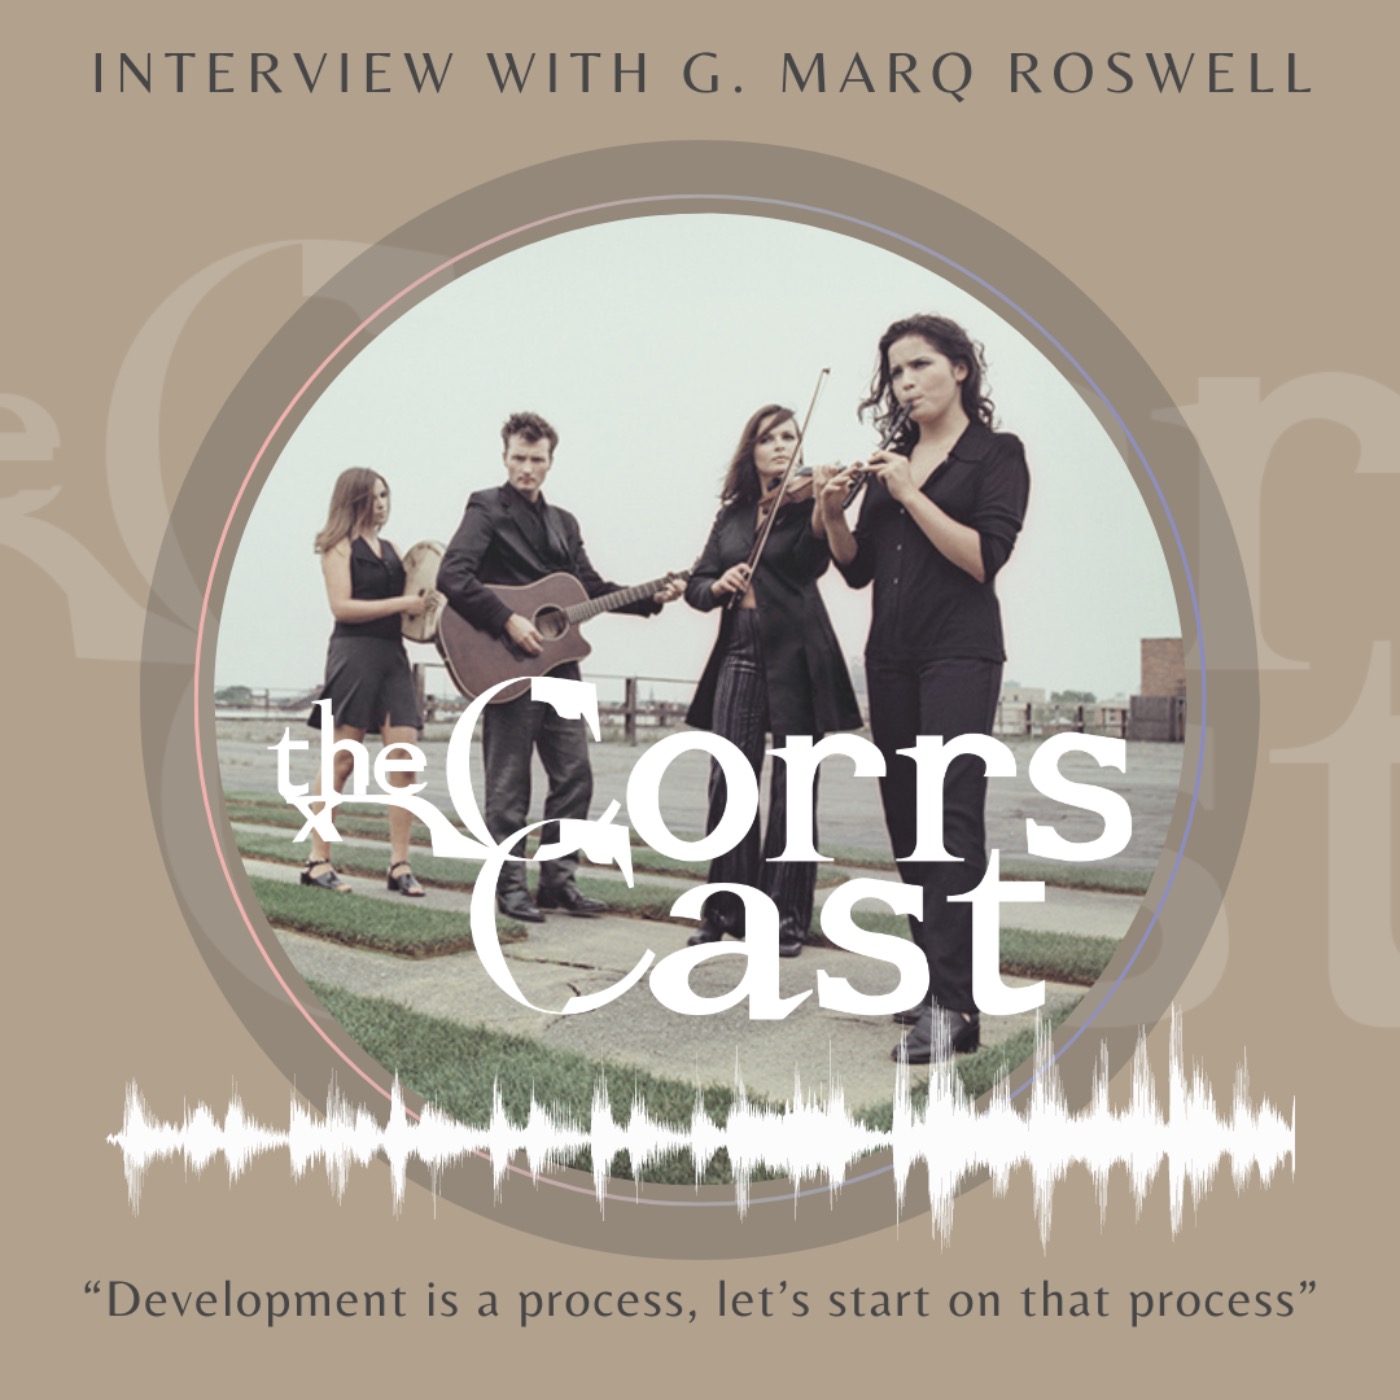 Interview with G. Marq Roswell